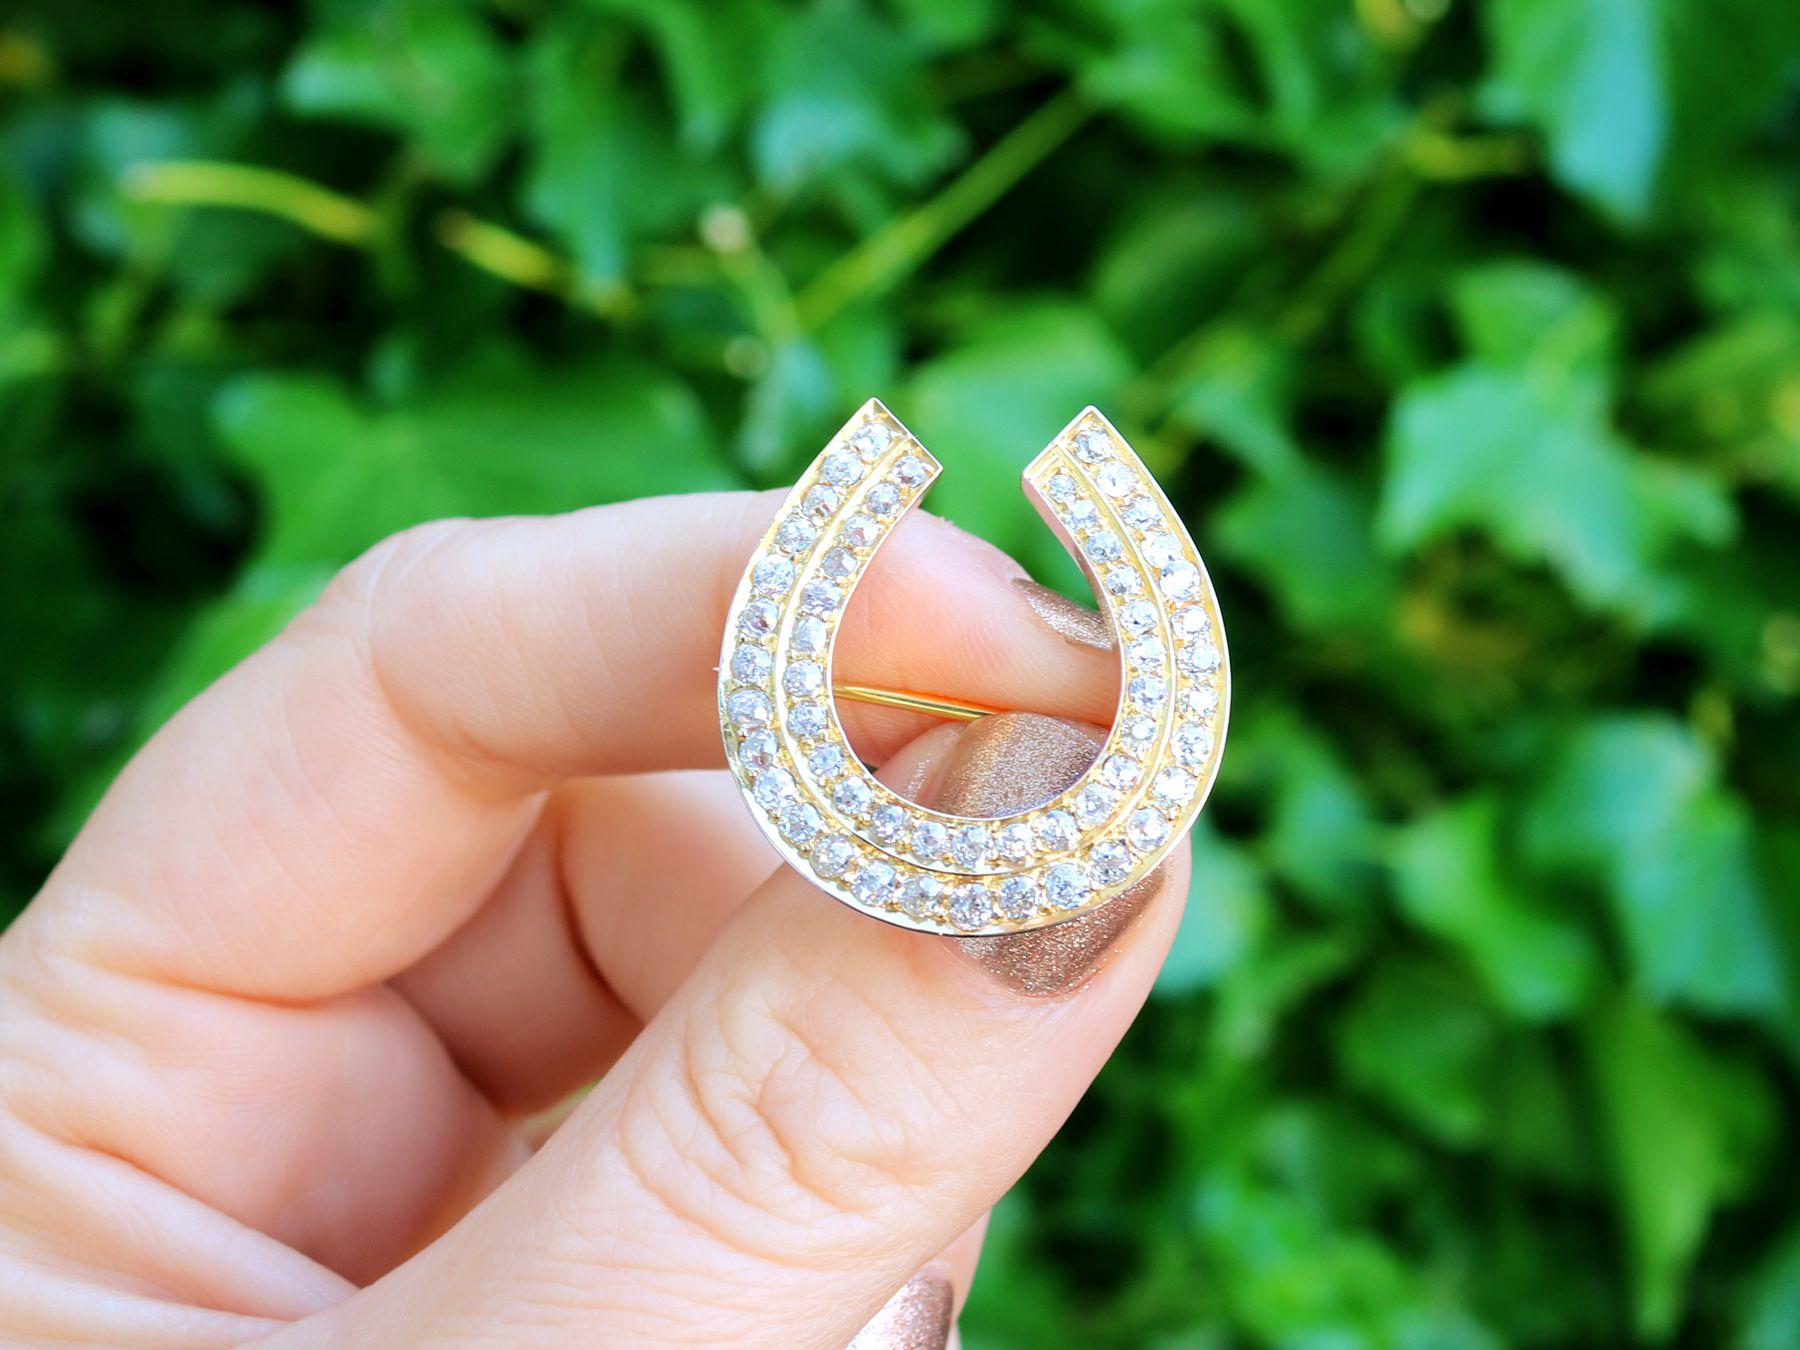 A stunning, fine and impressive antique 2.36 carat diamond and 9 karat yellow gold horseshoe brooch; part of our diverse antique jewelry and estate jewelry collections.

This exceptional, fine and impressive antique brooch has been crafted in 9k